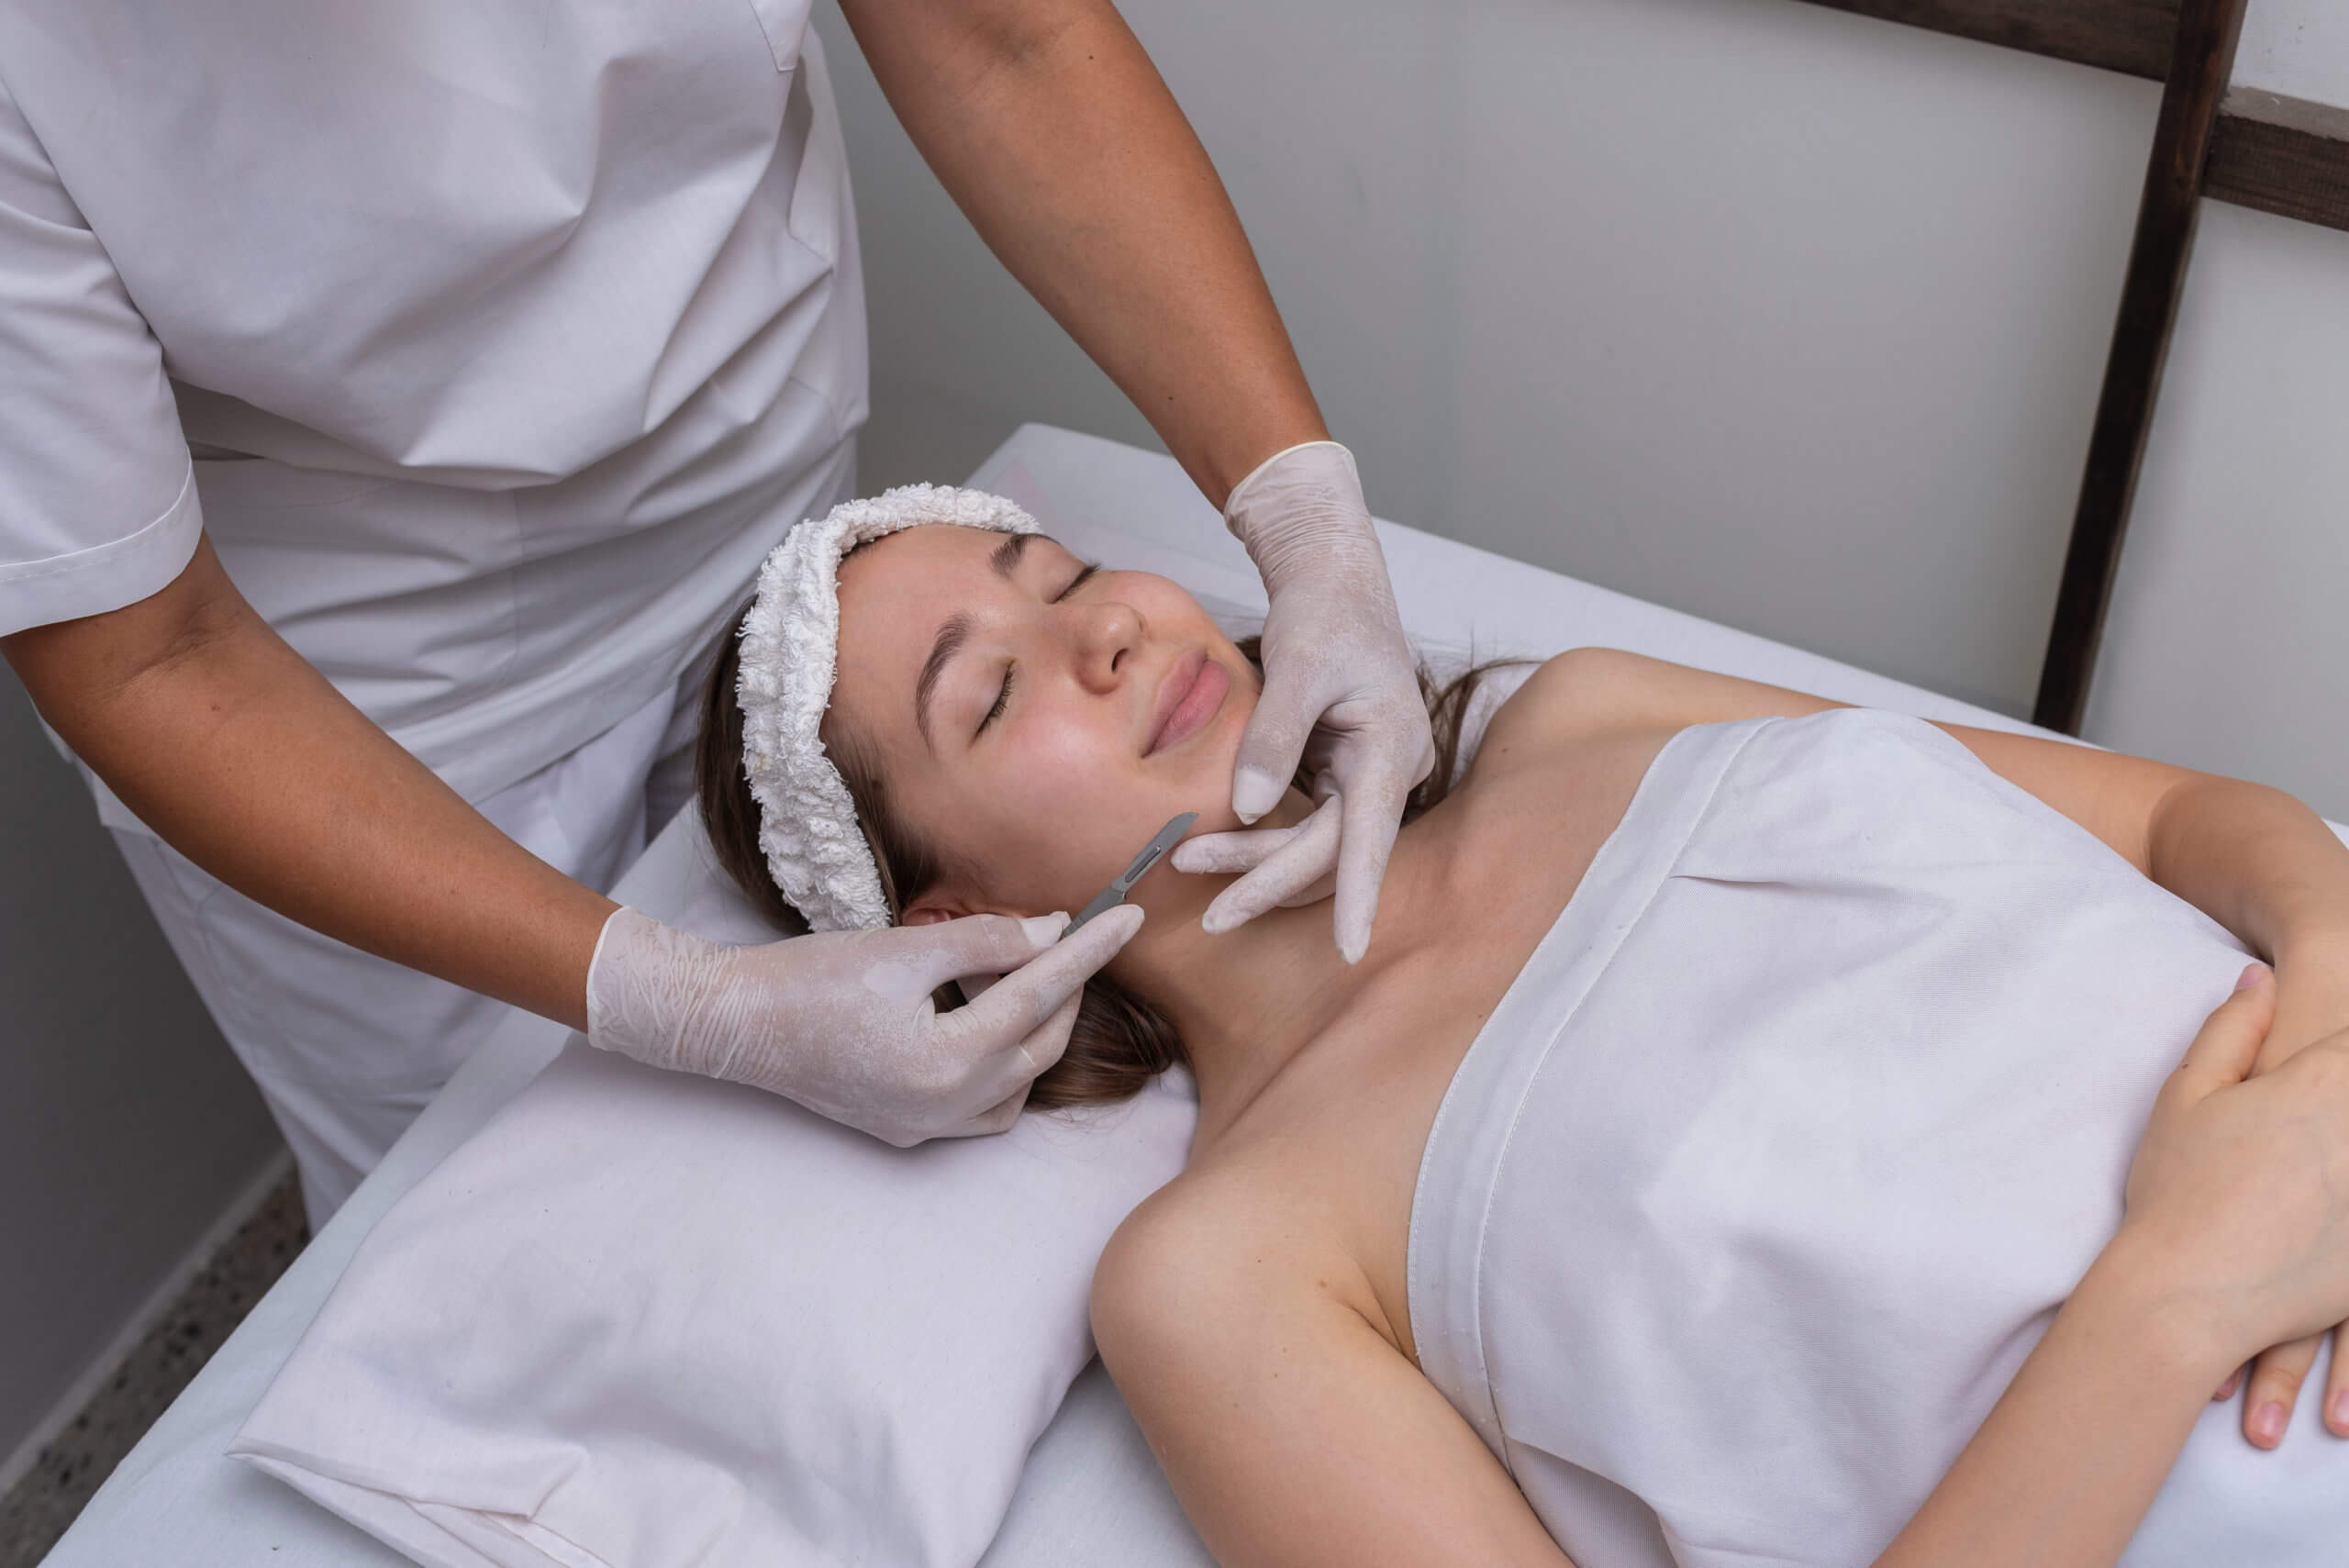 Beautiful young woman lying on a stretcher in an aesthetic center performing dermaplaning technique | Casa Glow Inc in East 22nd Street New York